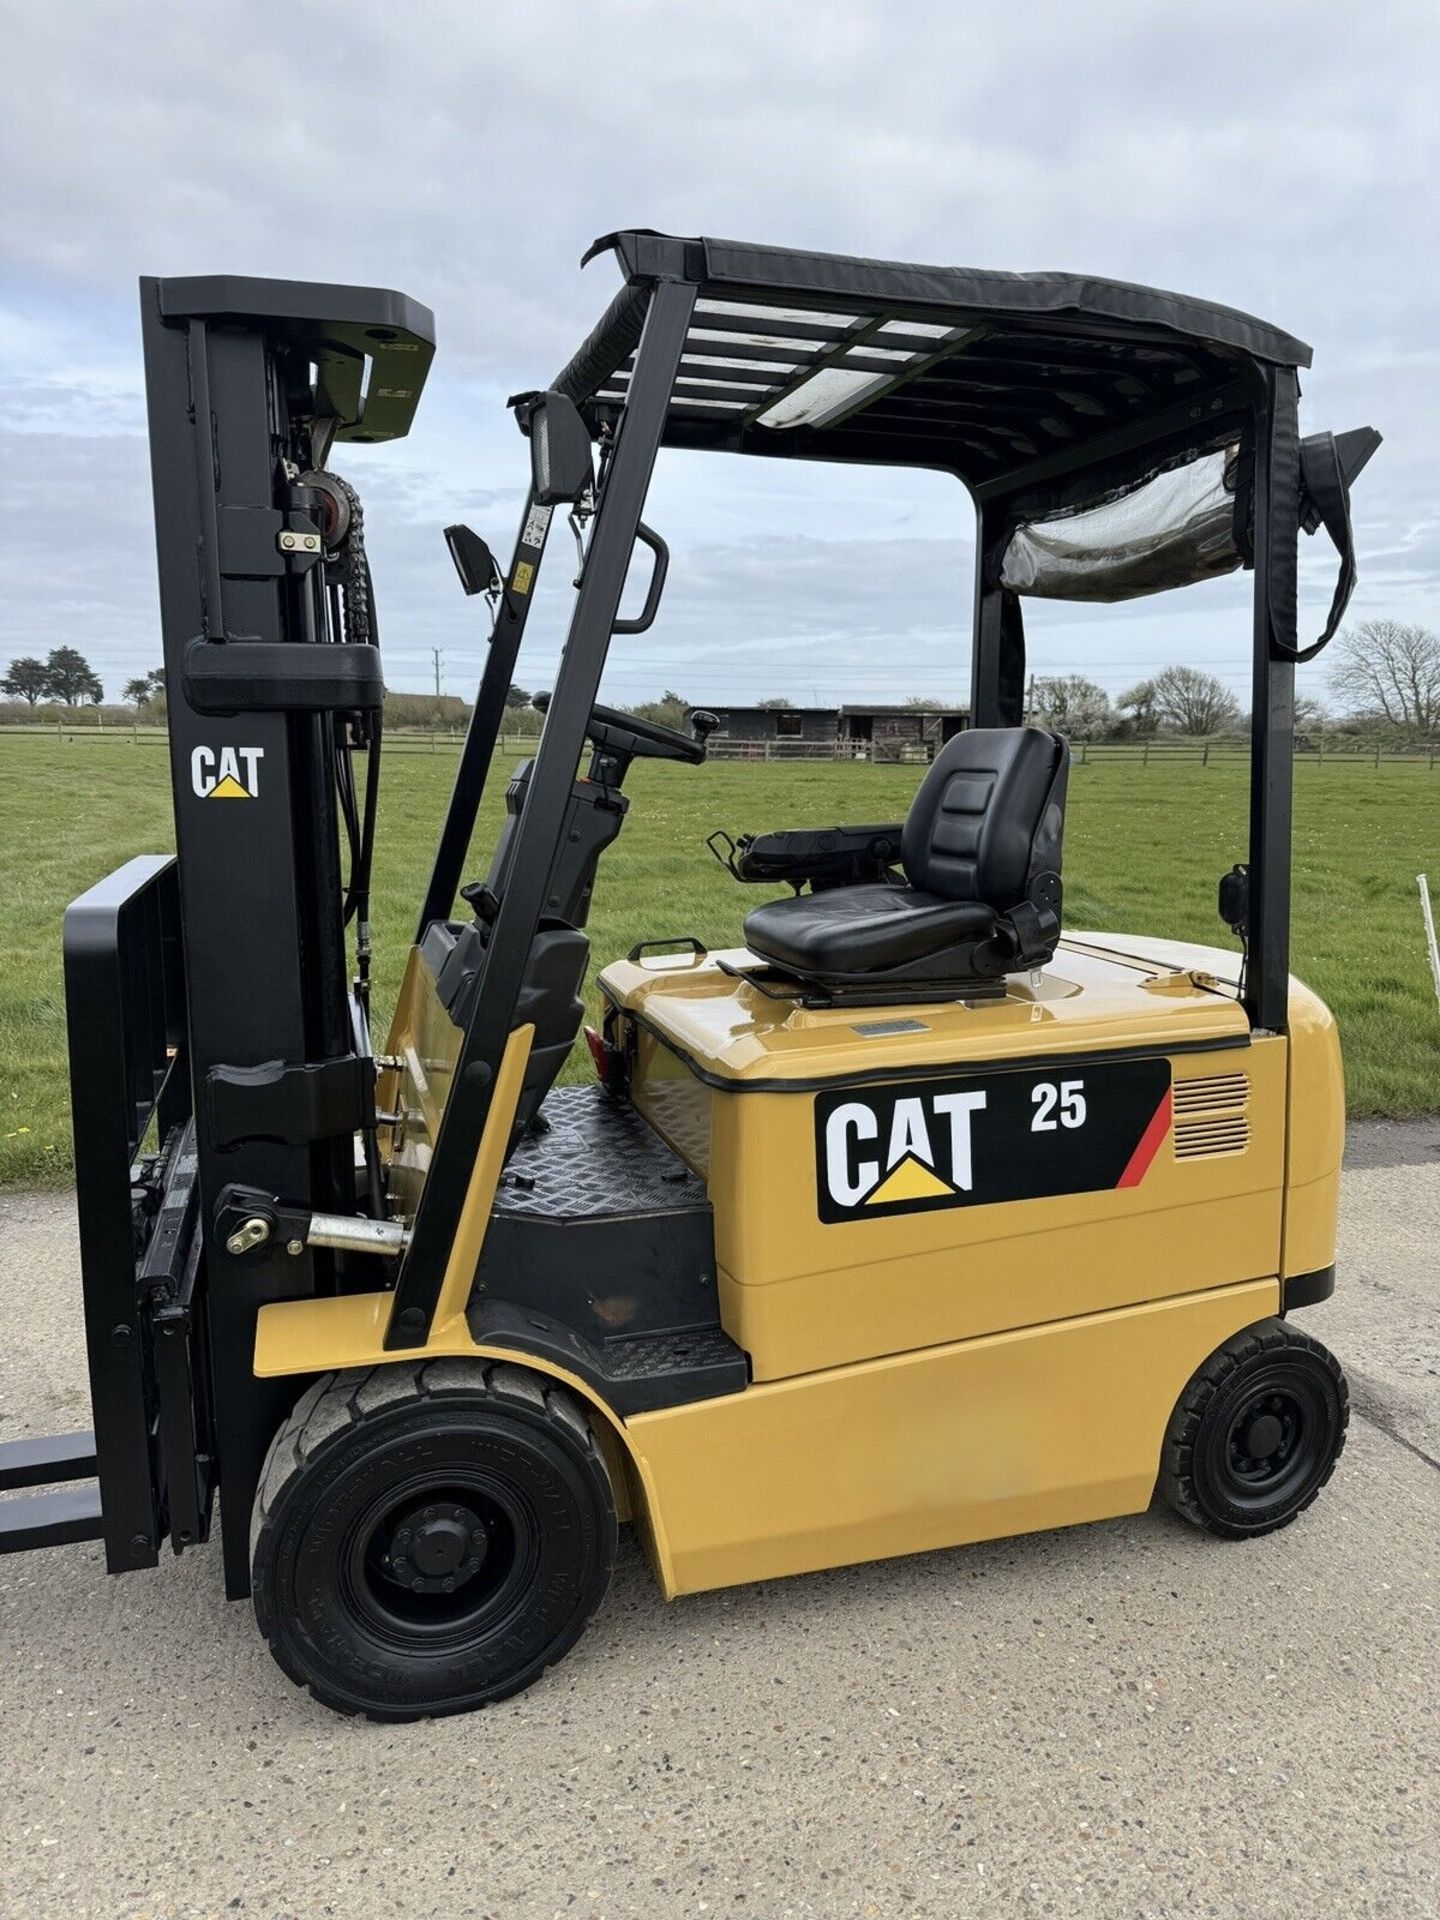 CATERPILLAR - 2.5 Tonne Electric Forklift Truck (Container Spec) - Image 6 of 7